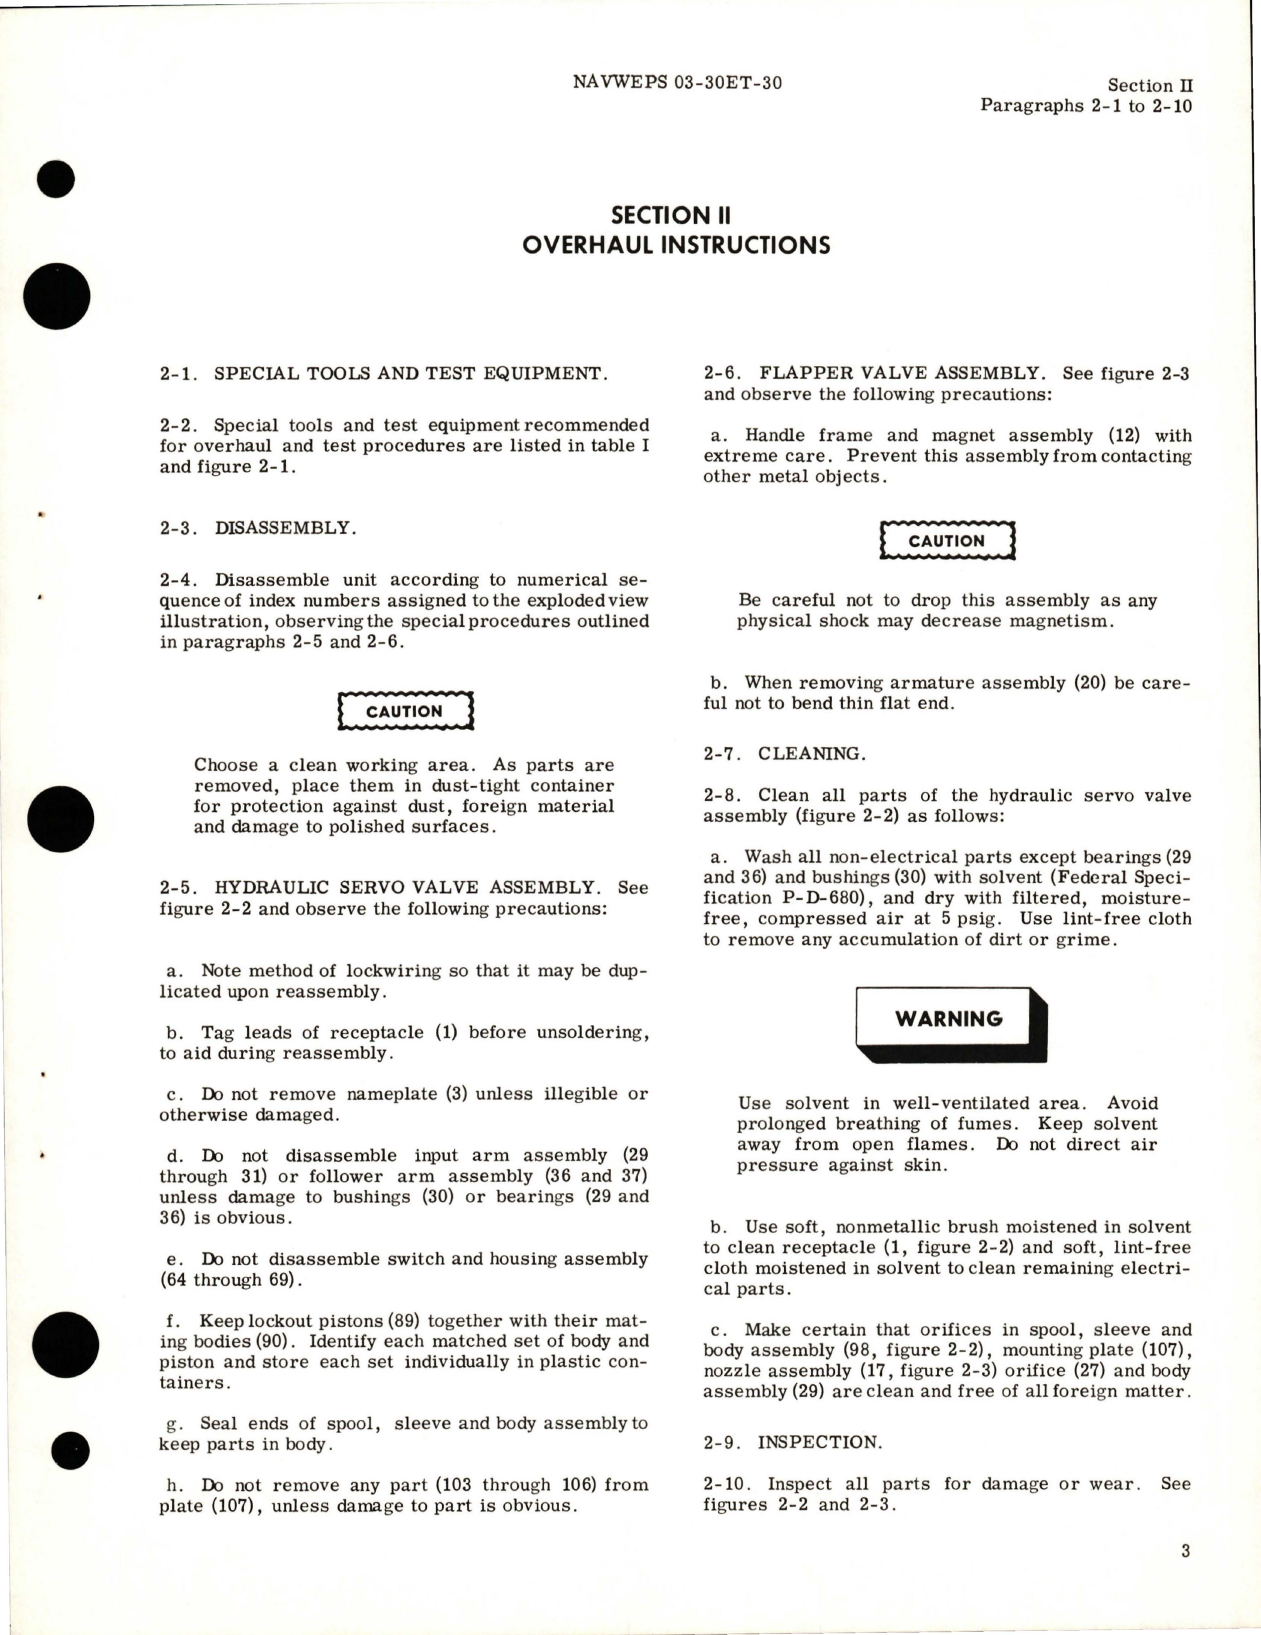 Sample page 7 from AirCorps Library document: Overhaul Instructions for Hydraulic Servo Valve Assy - Part 100550 